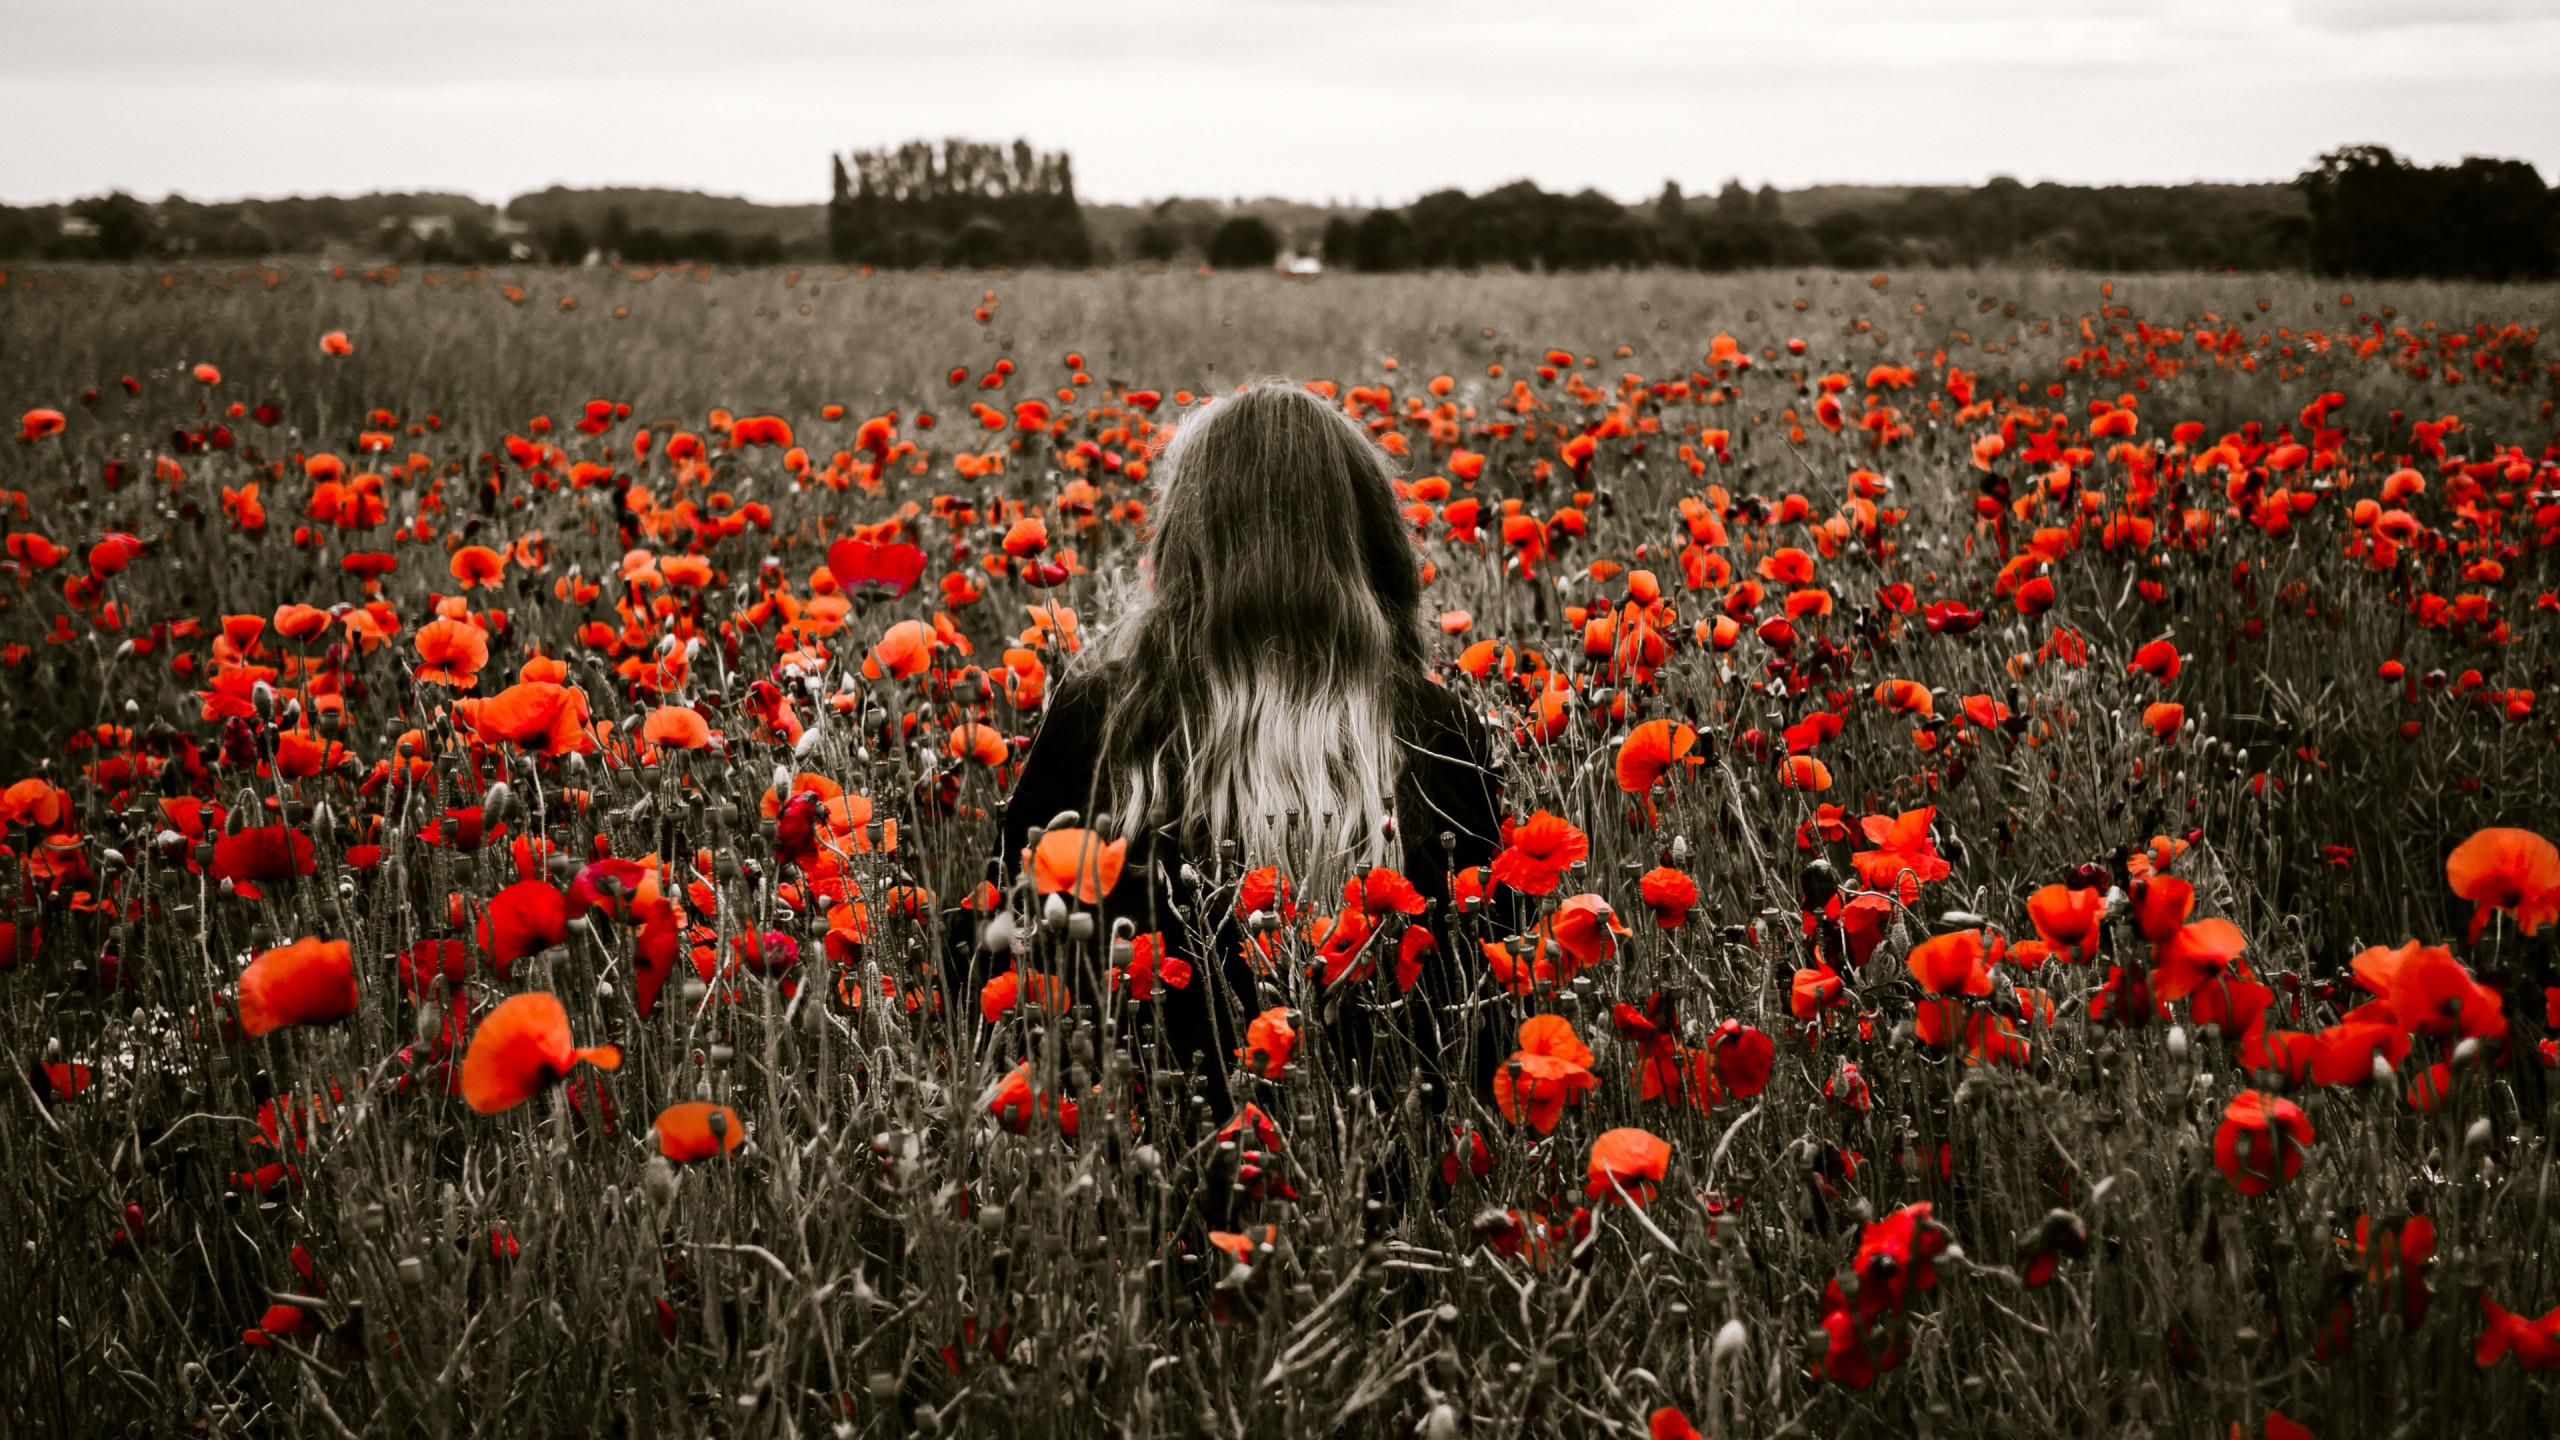 Girl in the field with red poppies wallpaper 2560x1440